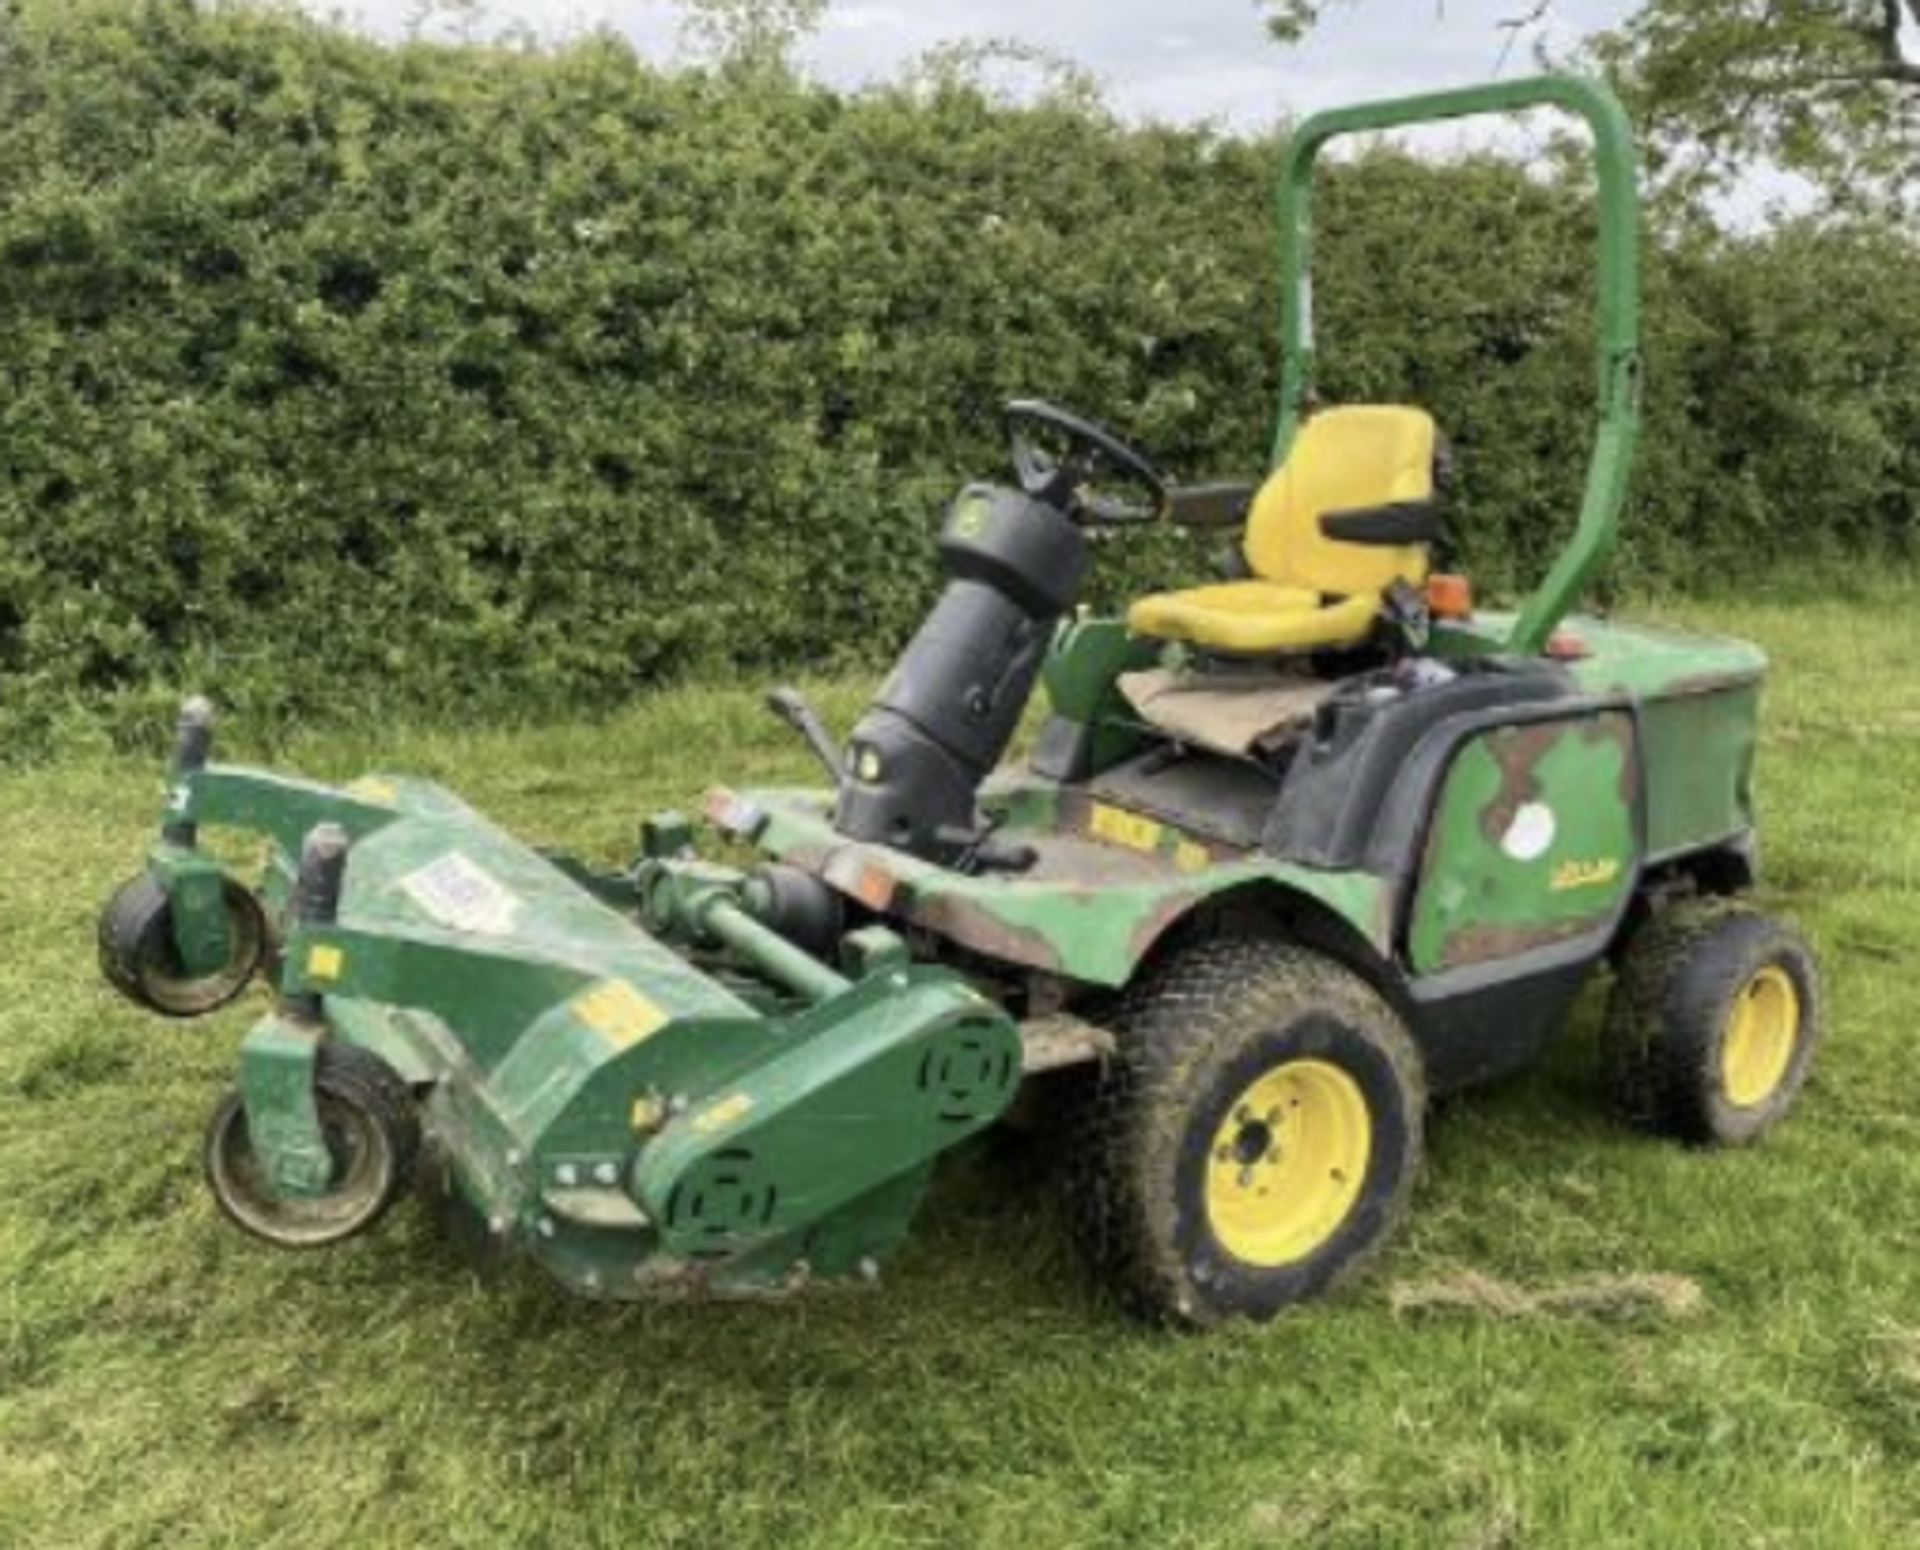 JOHN DEERE 1545 FRONT FLAIL MOWER.YEAR 2012. 1 OWNER FROM NEW. HOURS 2900. LOCATION NORTH YORKSHIRE. - Image 5 of 6